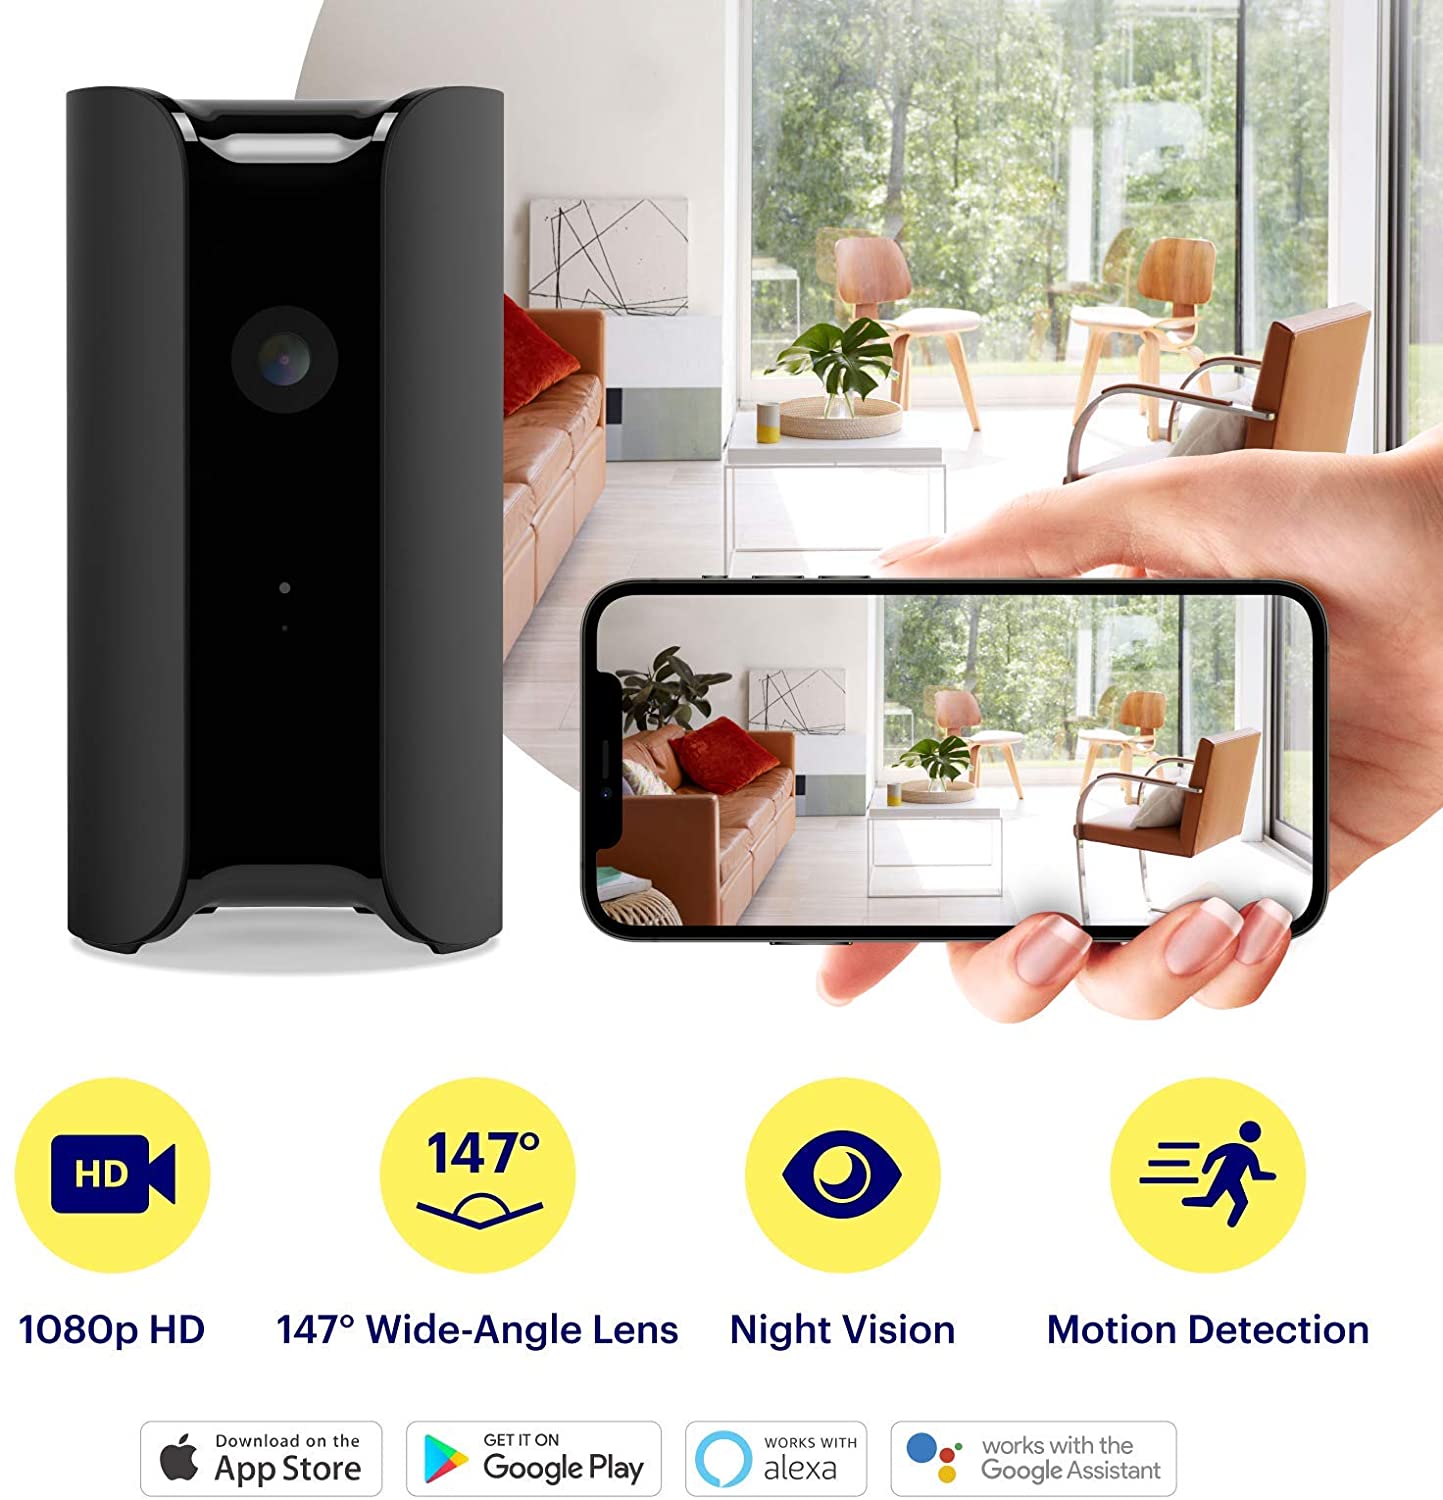 Canary Pro All-in-One many features camera